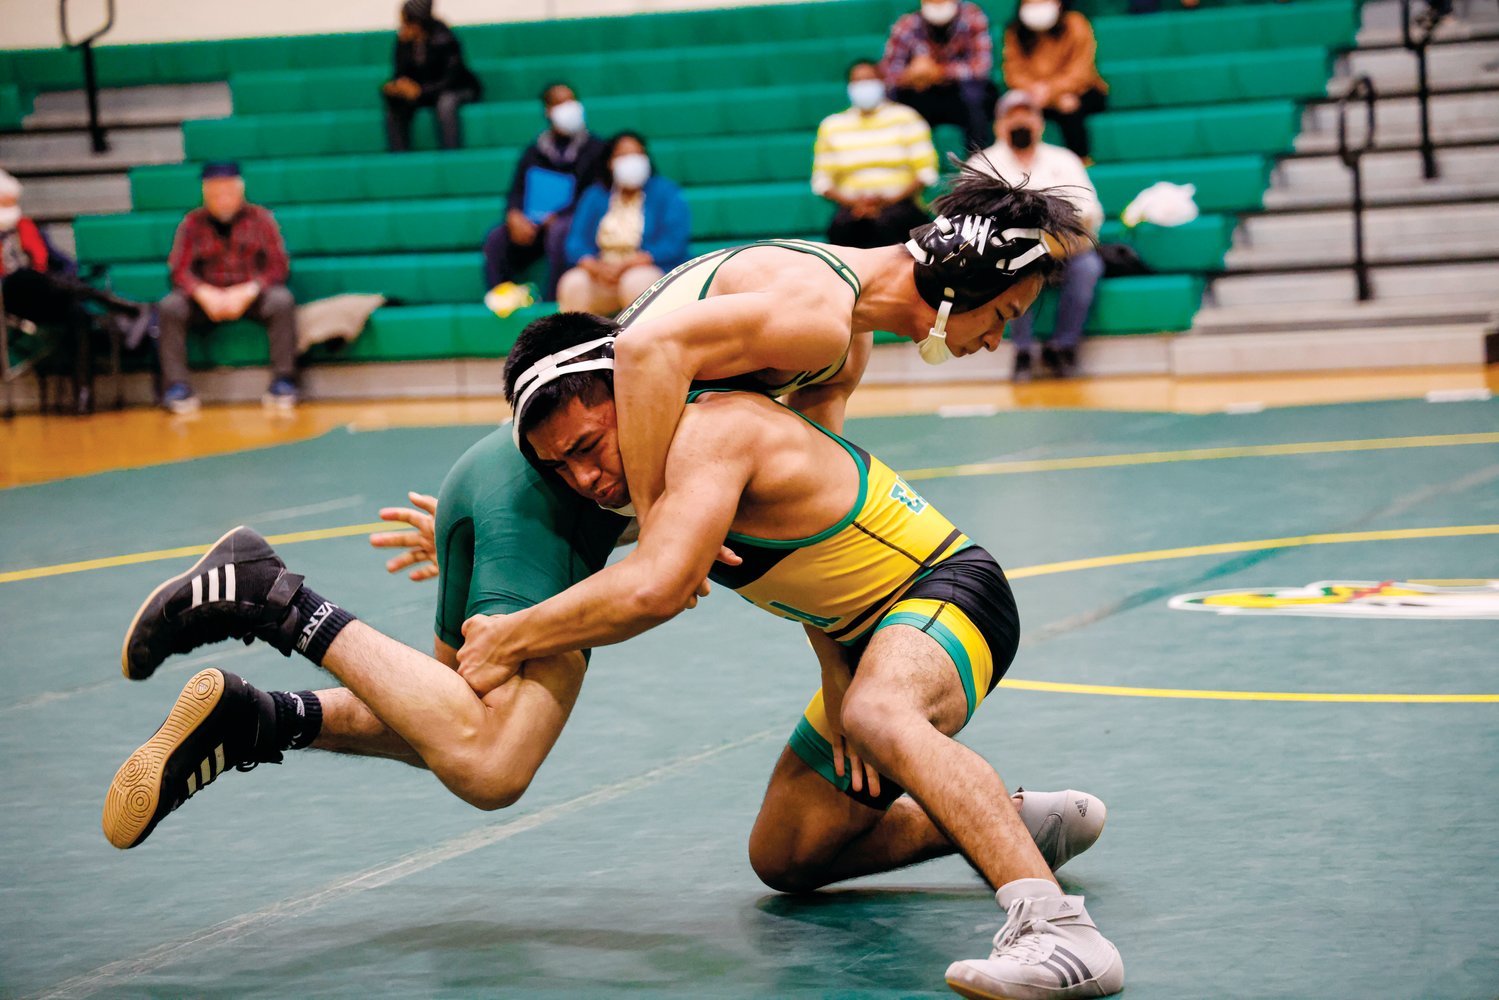 Northwood's Sunday Oo (green bottoms) sprawls and slips in an undertook in an attempt to block a deep double-leg takedown shot by Eastern Alamance 113-pounder Willfen Lopez during the Chargers' 42-36 win over Eastern Alamance last Thursday.